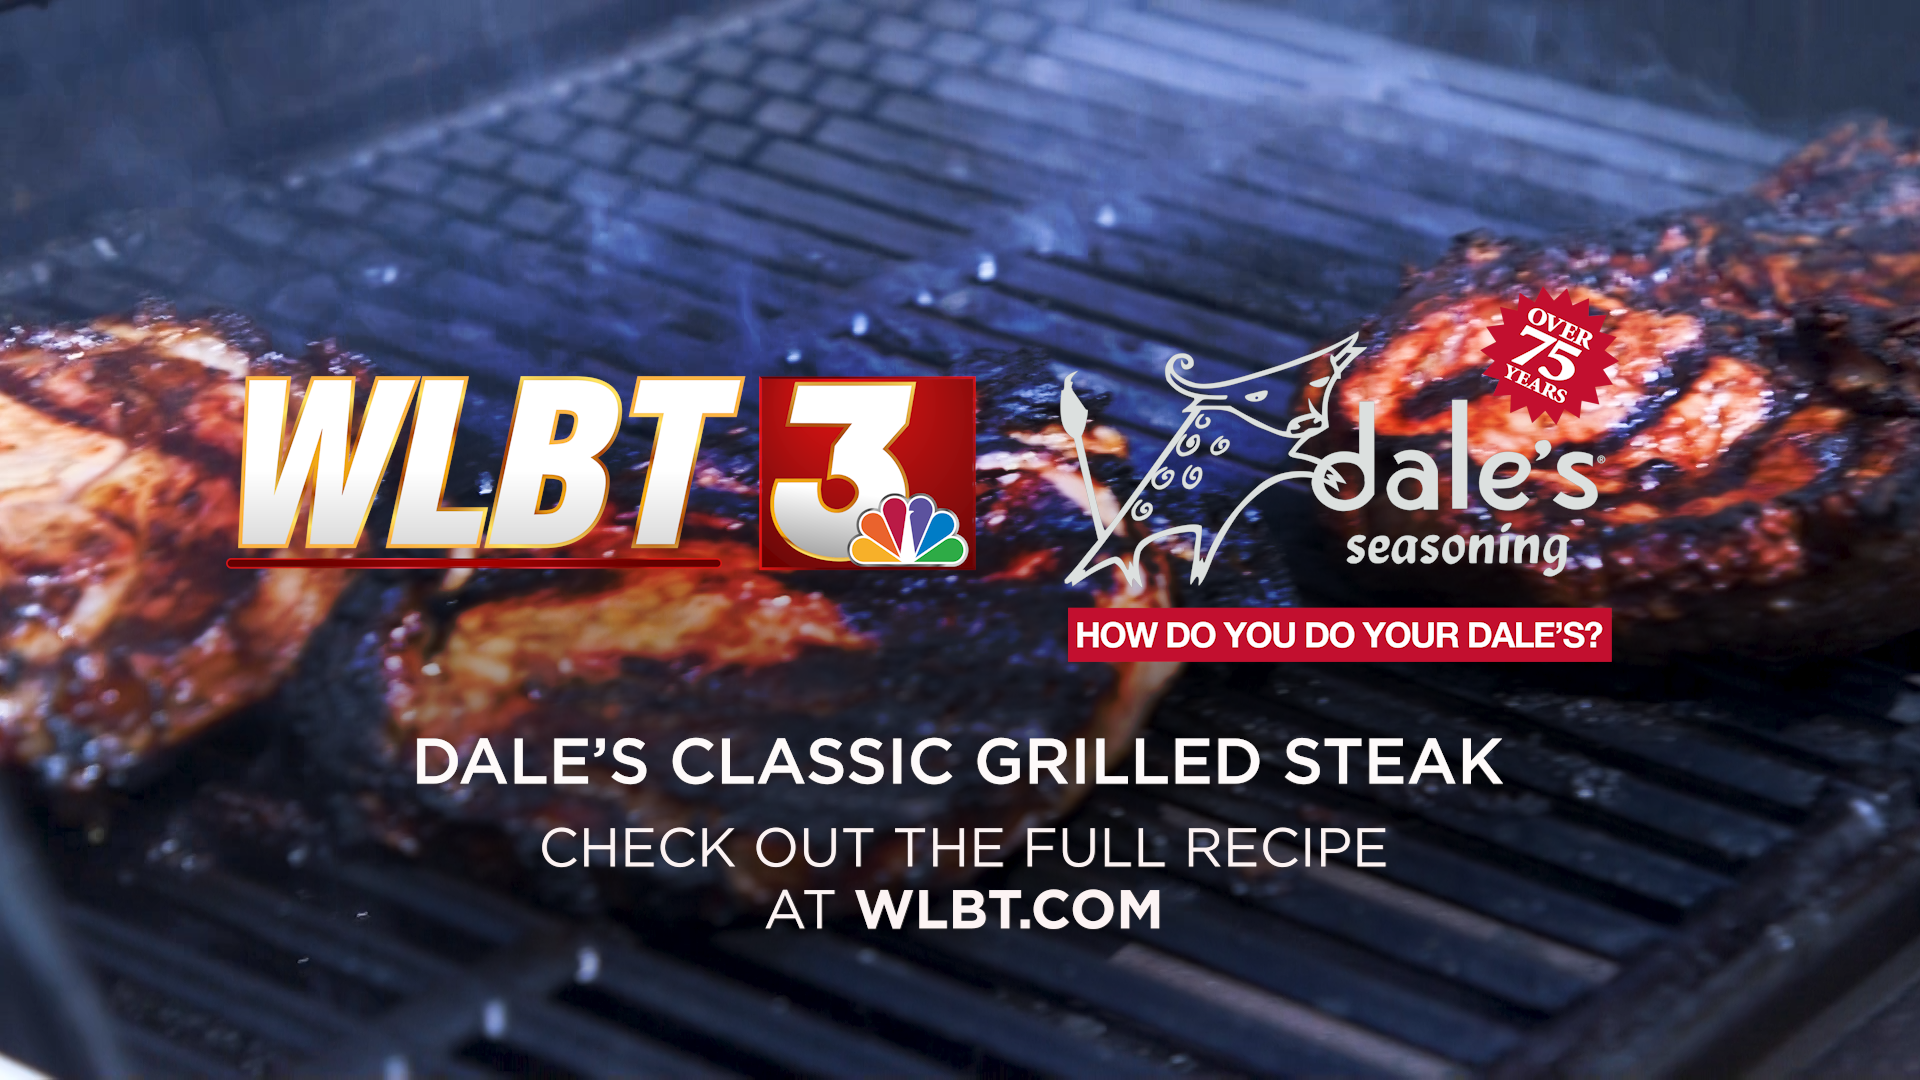 Dale's Classic Grilled Steak: Taste of Summer with Dale's Seasoning